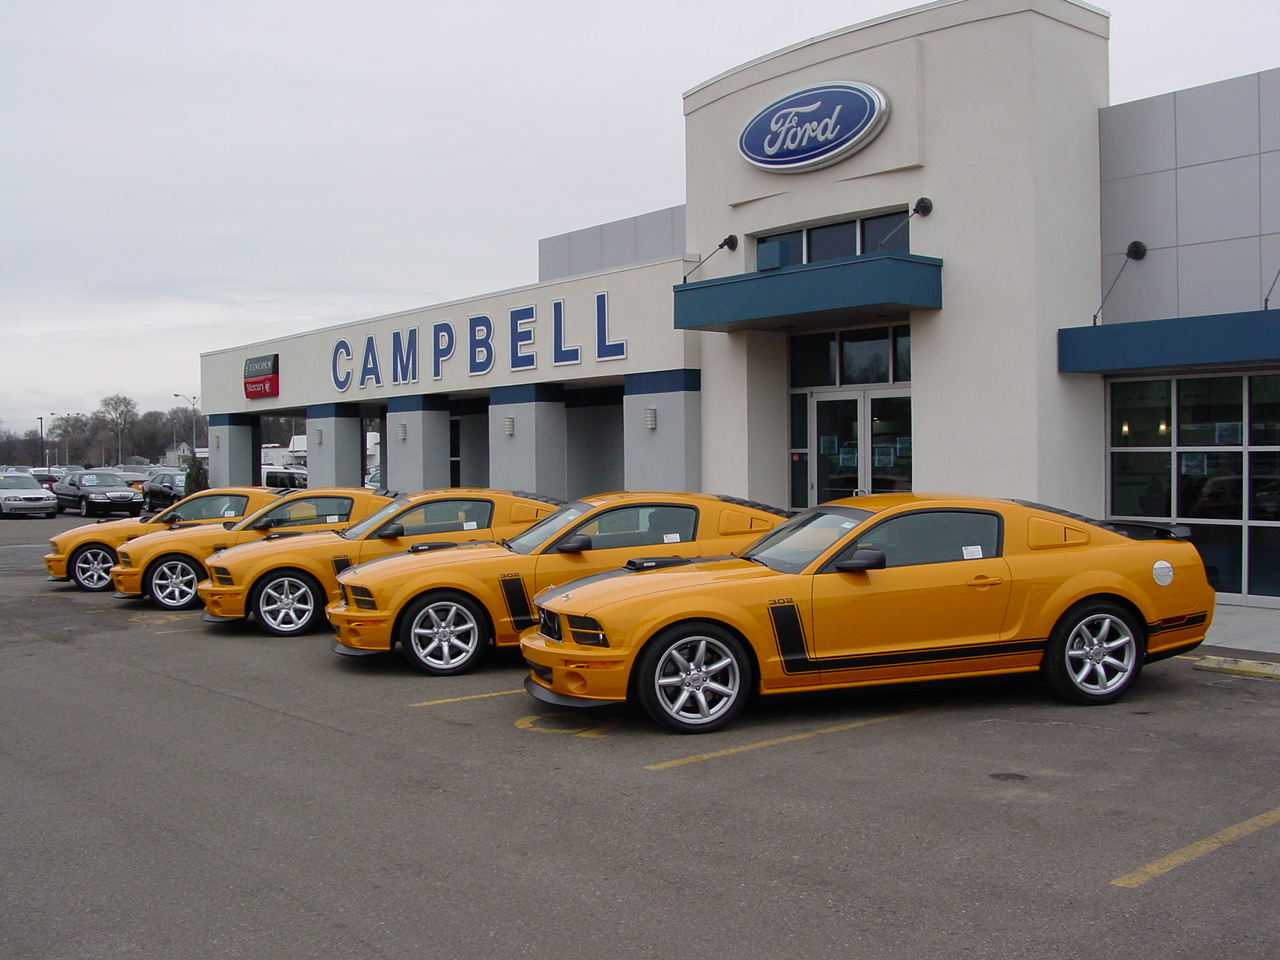 CAMPBELL FORD LINCOLN INC Niles MI 49120 Angies List